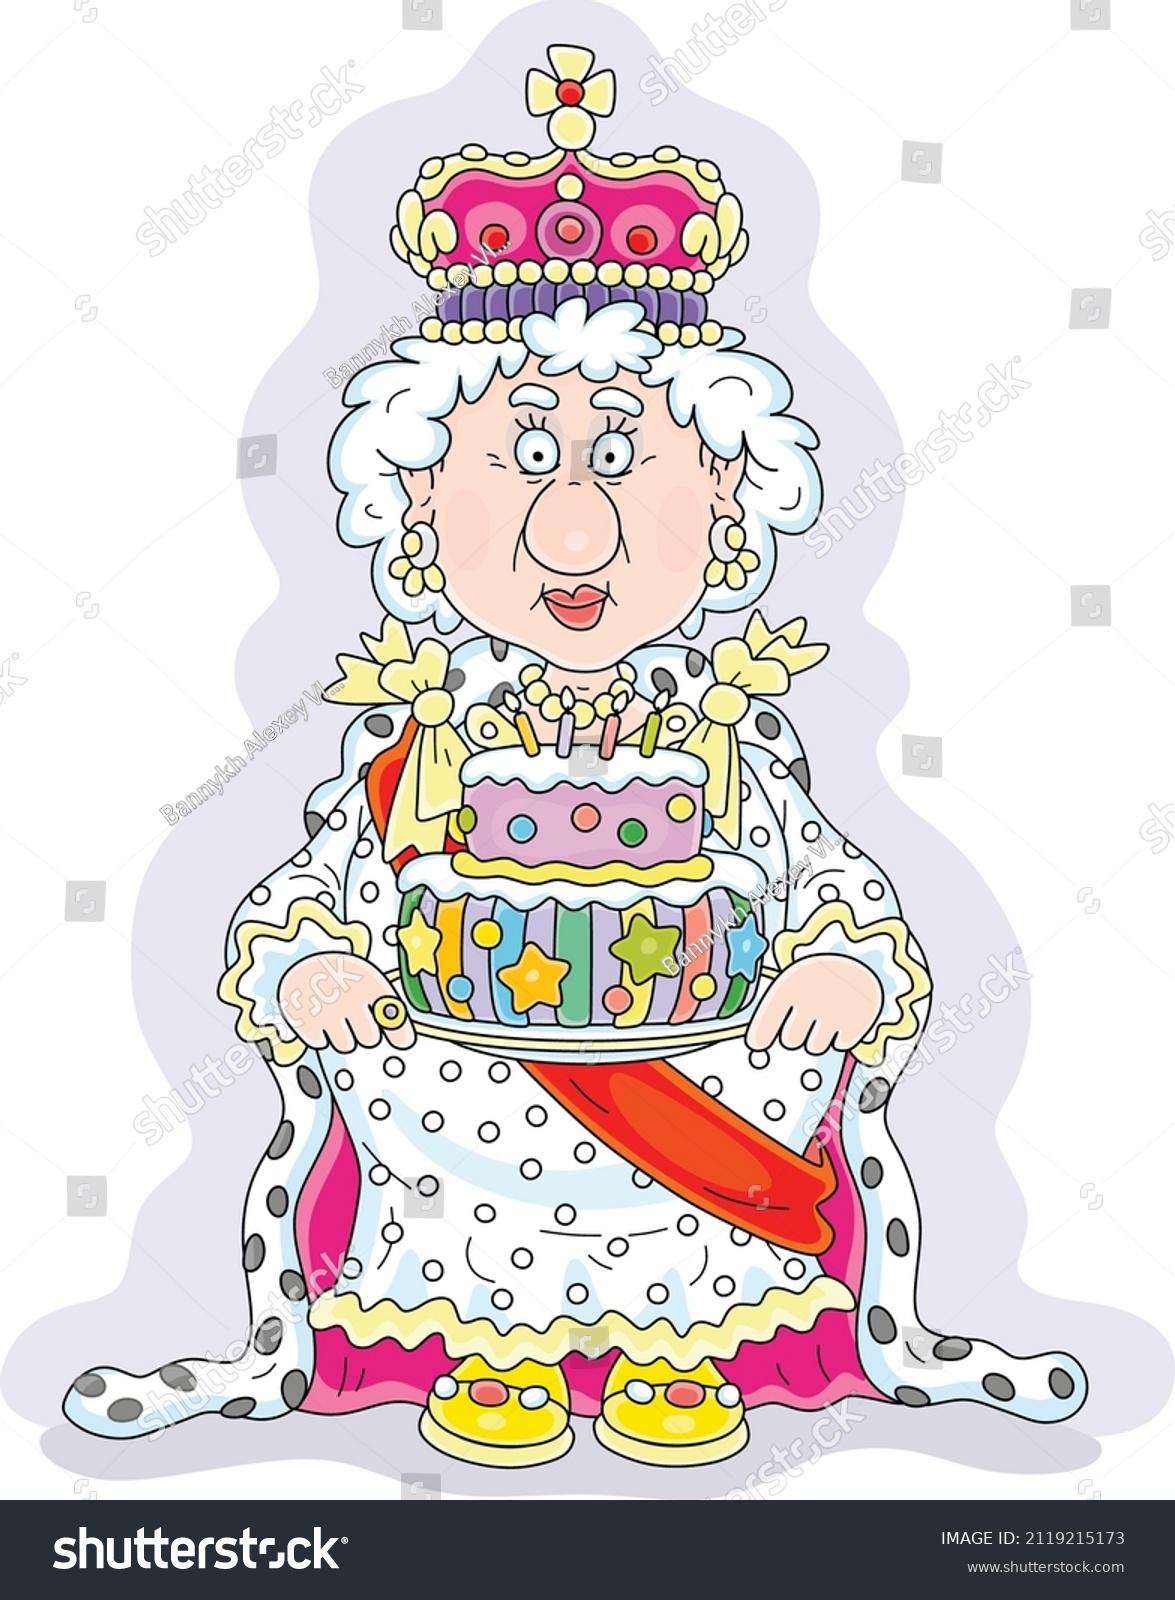 SVG of Queen in a crown and in a solemn royal dress holding a fancy holiday cake decorated with candles and sweet stars at a festive ceremony in a palace, vector cartoon illustration on white svg